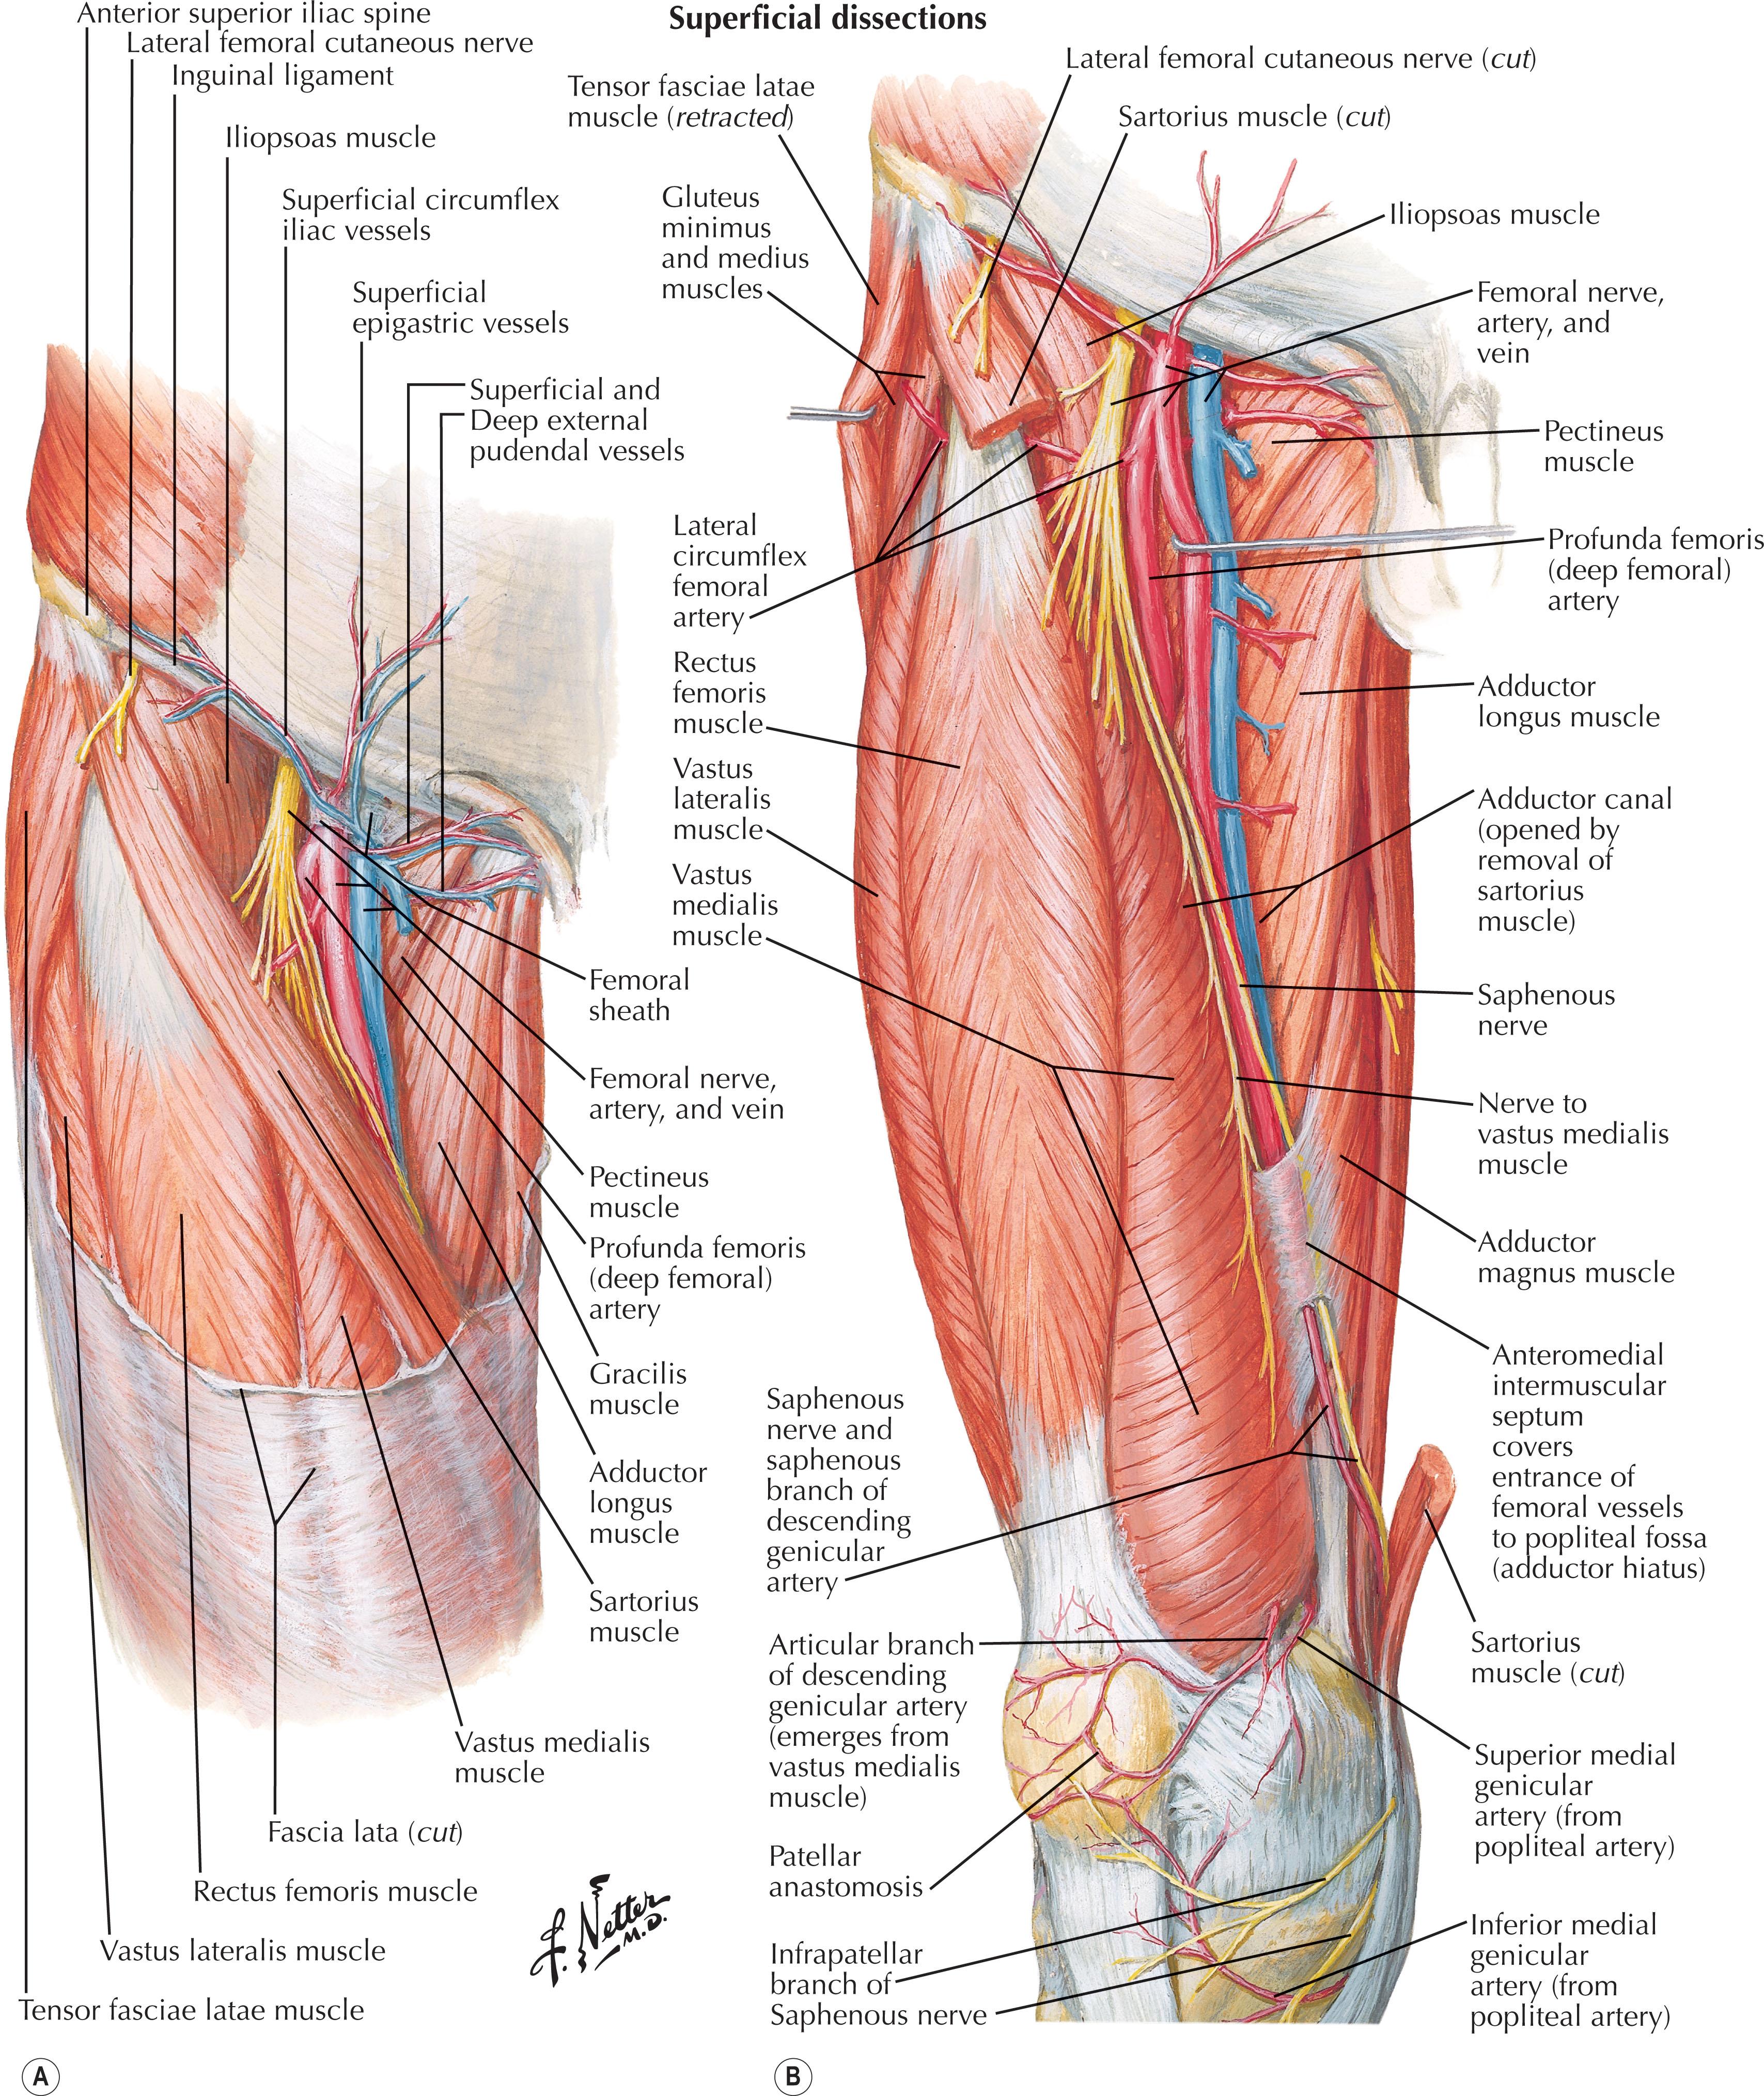 Figure 1.9, Arteries and nerves of thigh: anterior views.